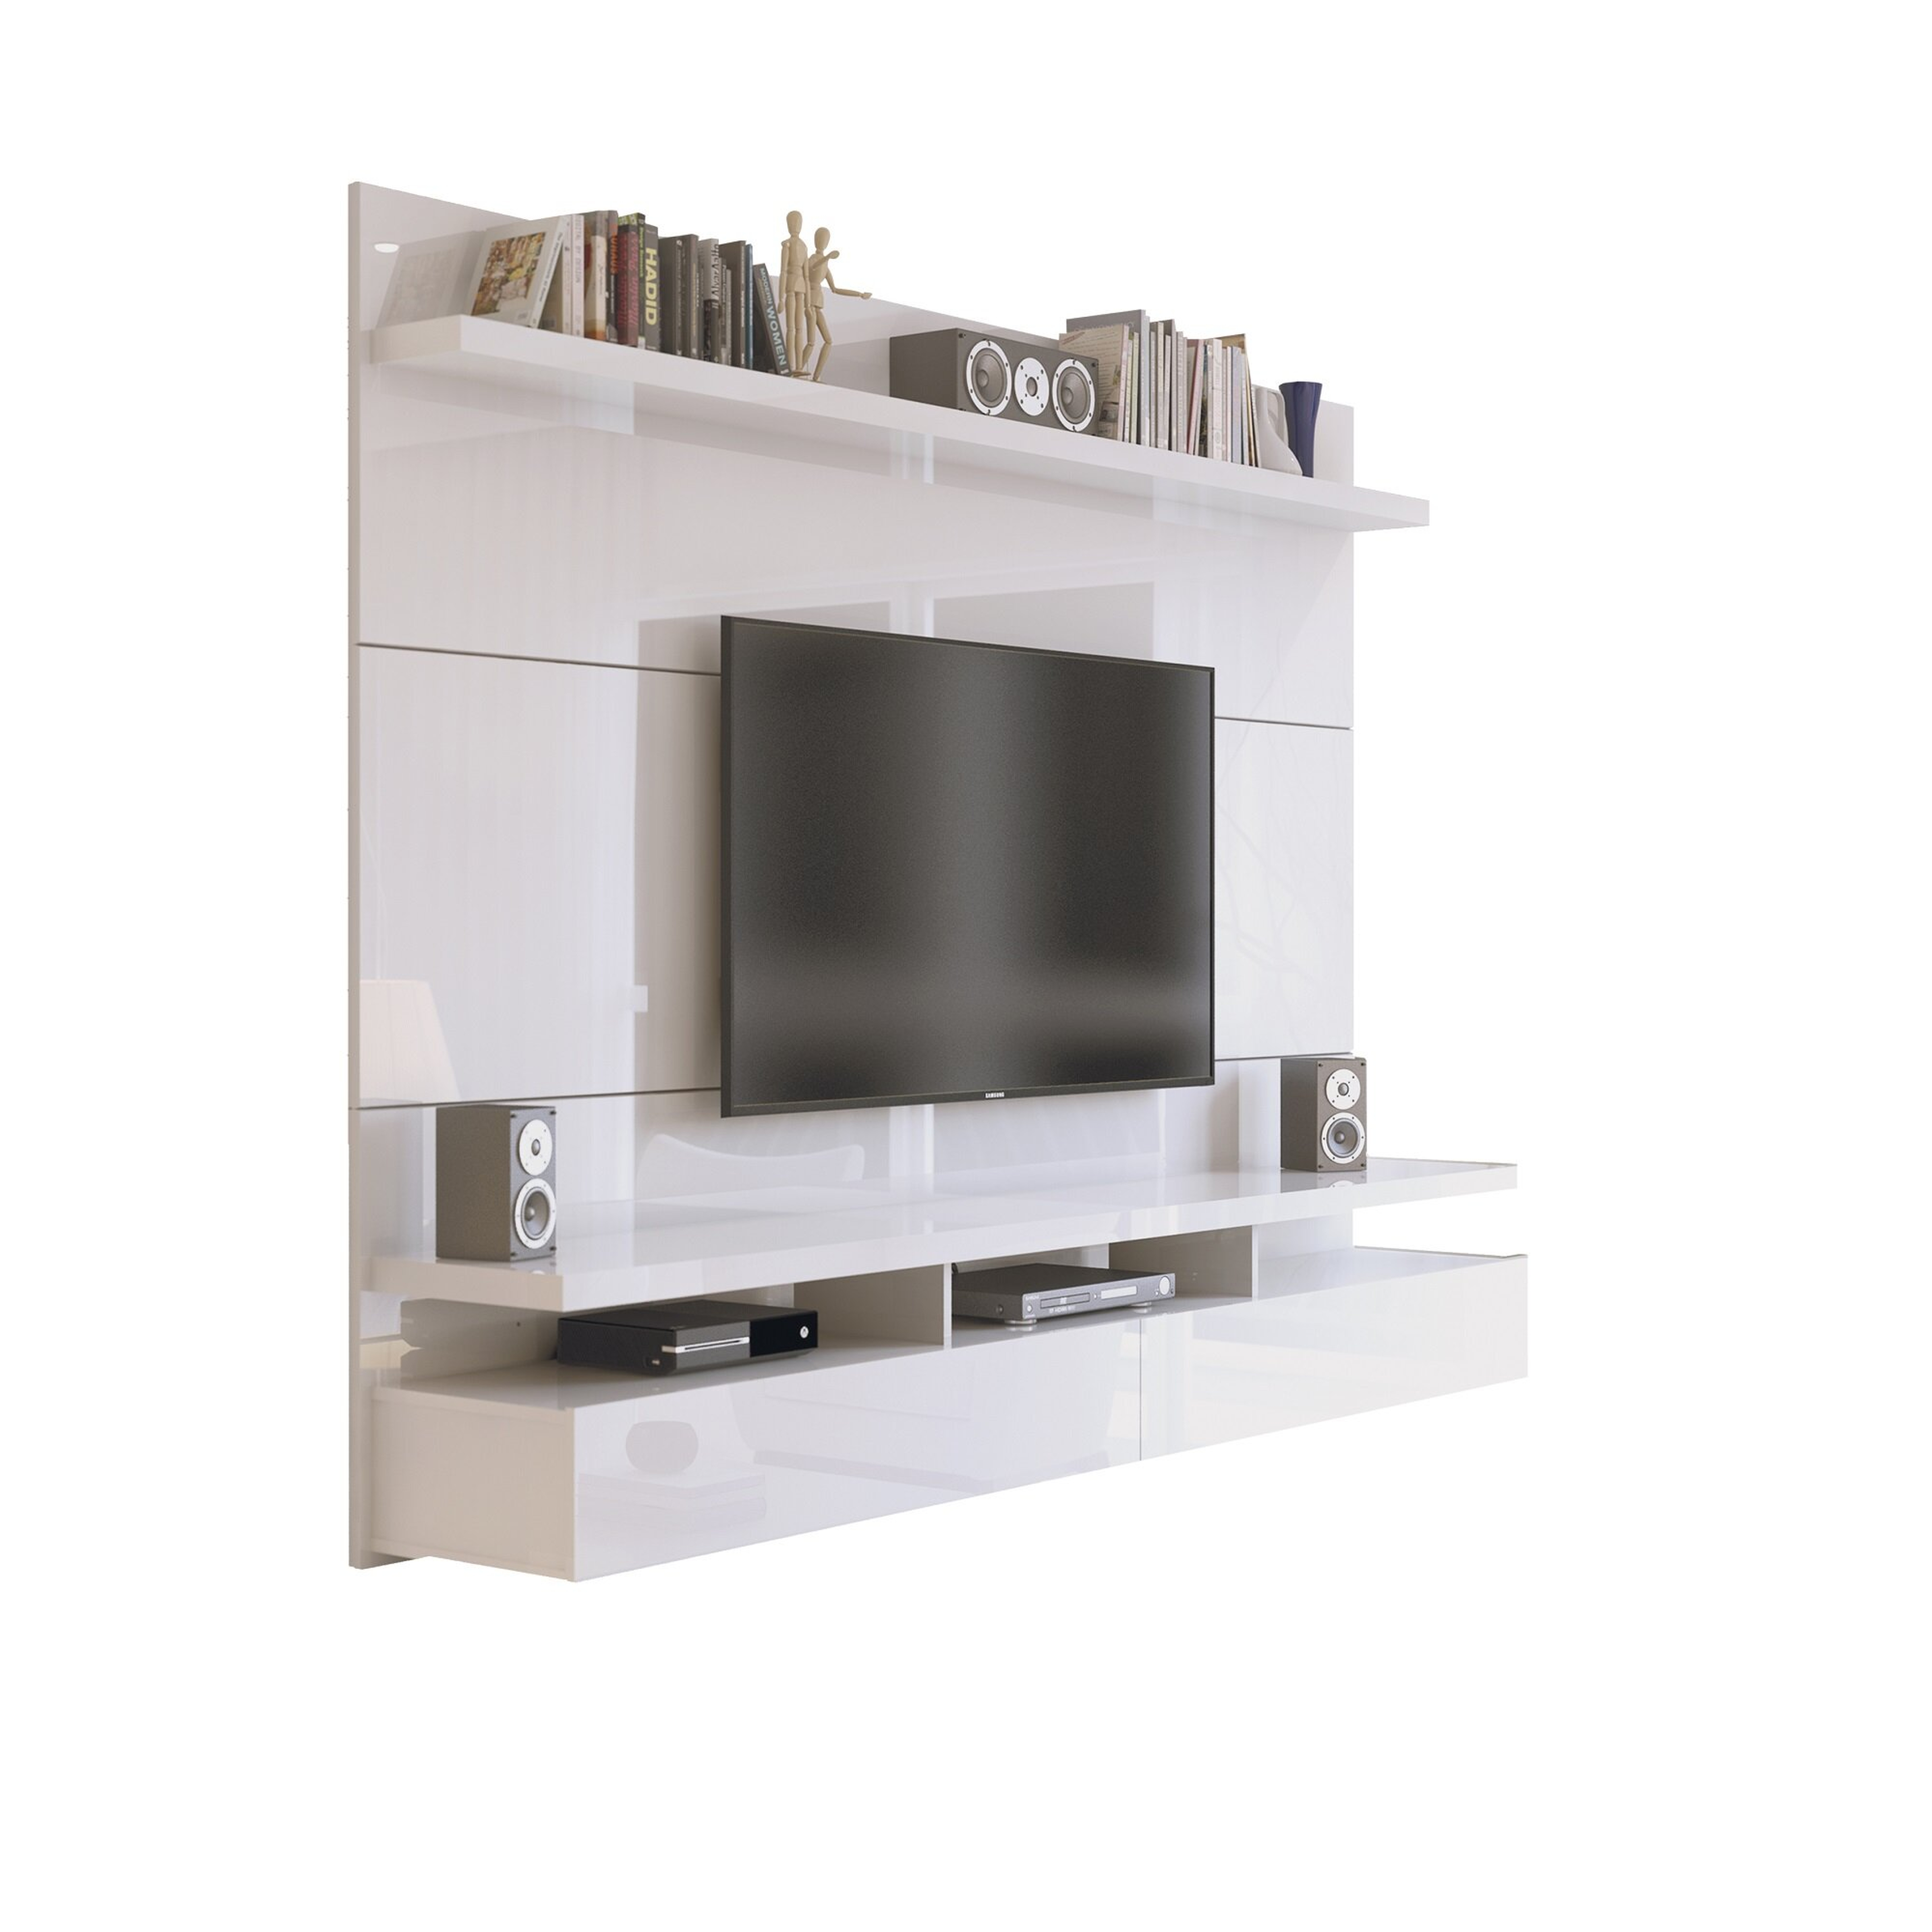 Boone Floating Entertainment Center for TVs up to 70" - Wayfair